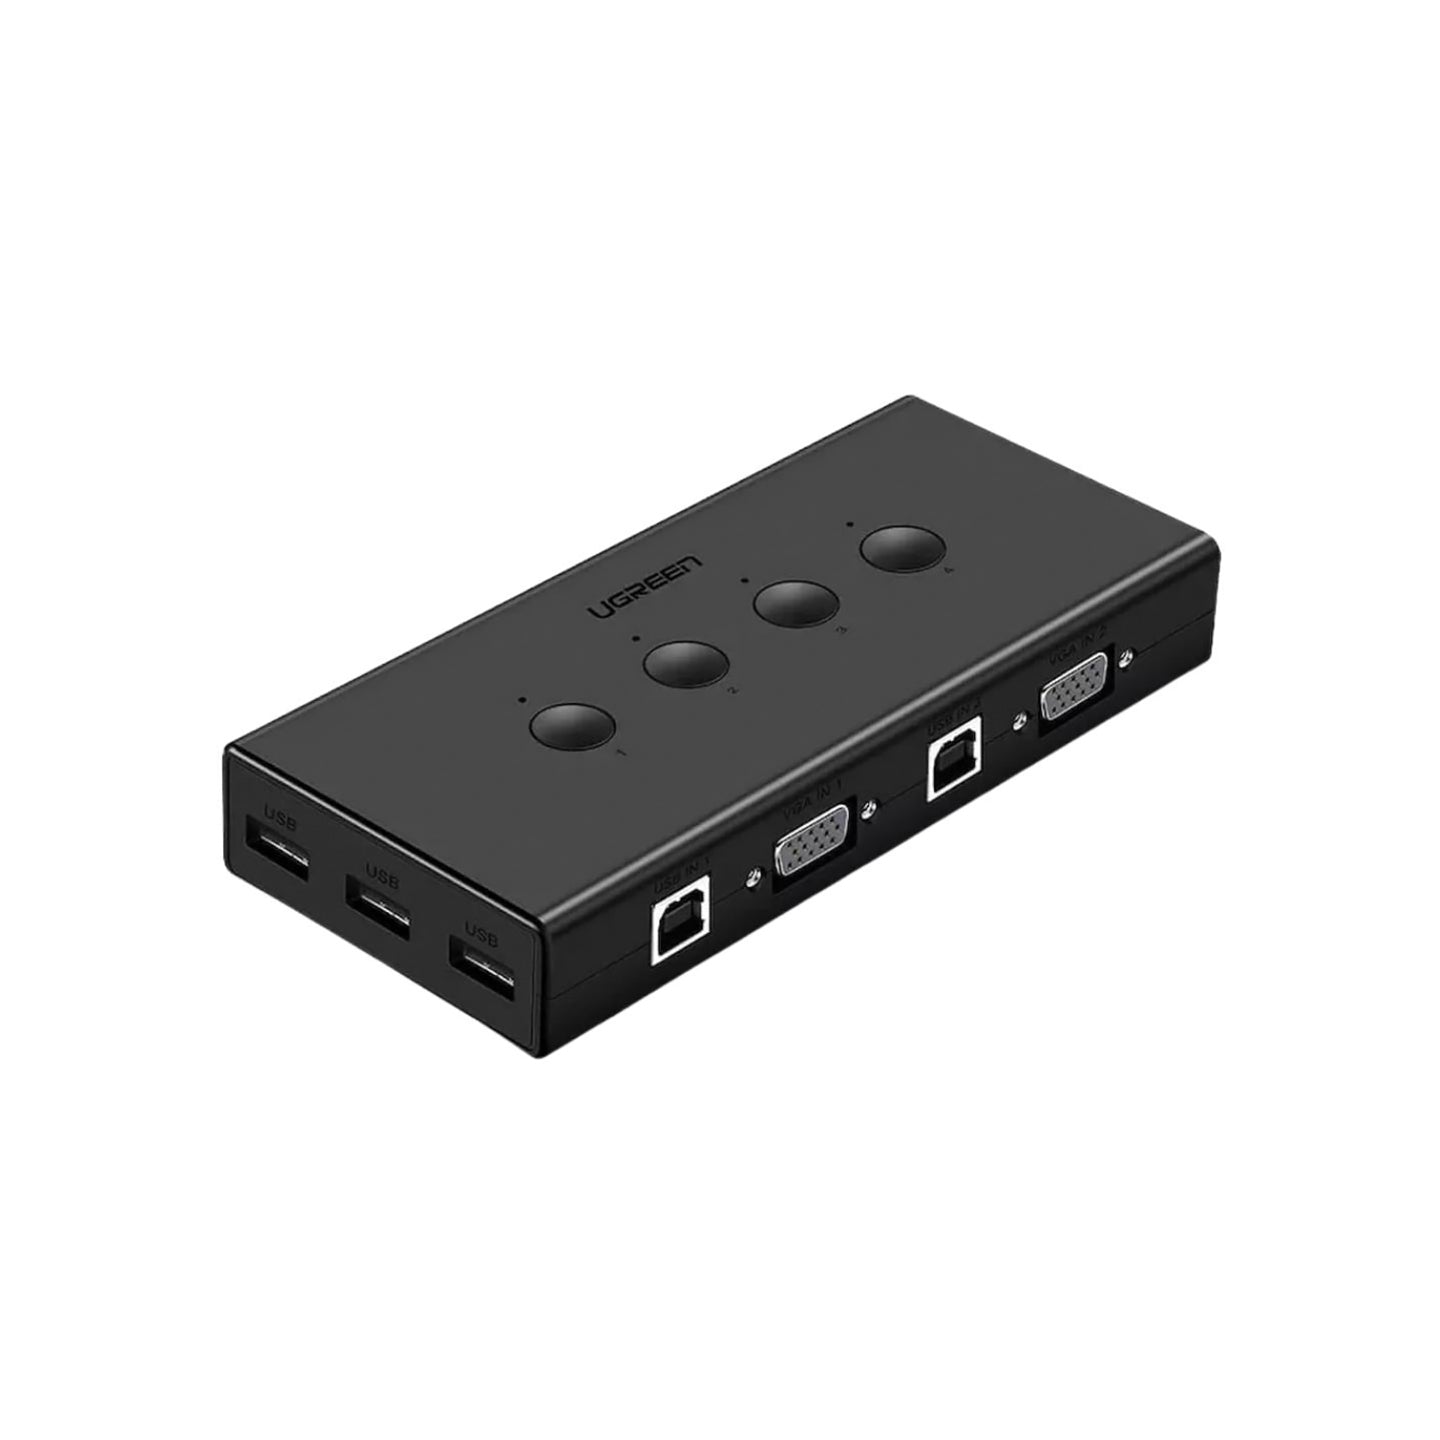 Ugreen 4 USB KVM Switch – the best products in the Joom Geek online store